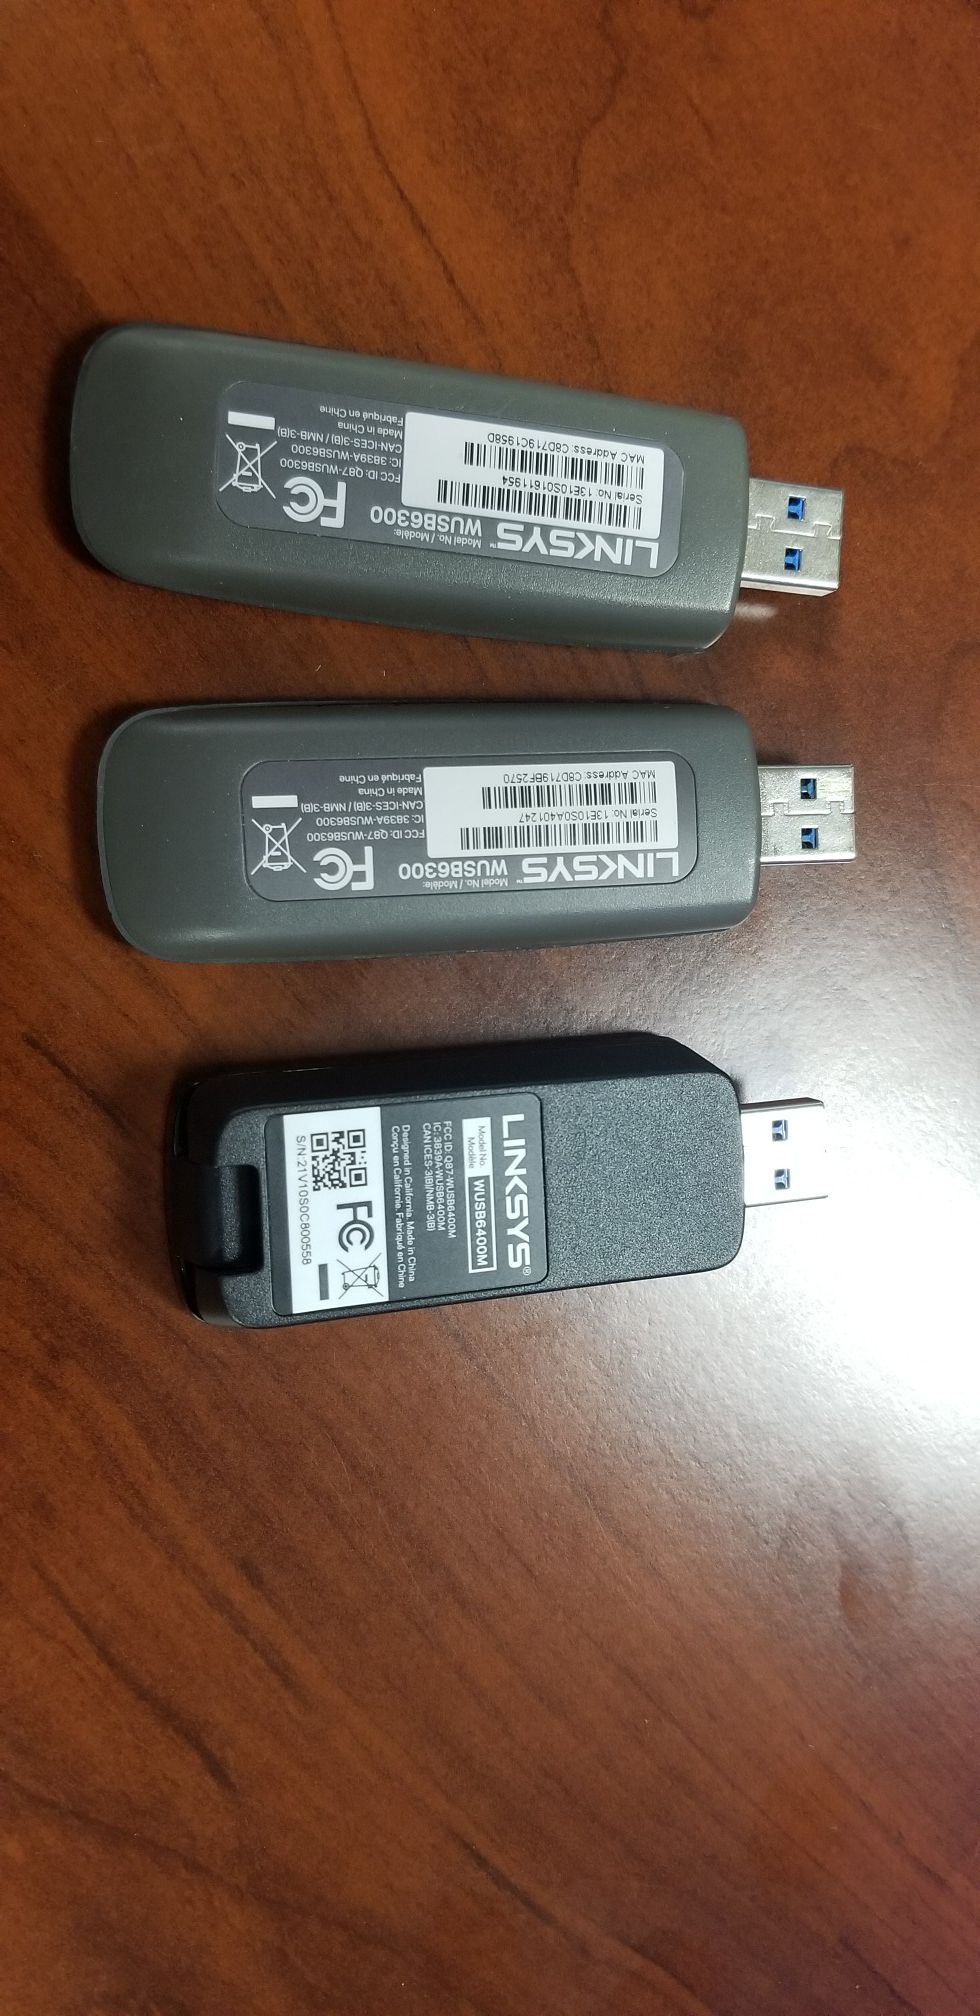 Network Adapters (Linksys 6400m)